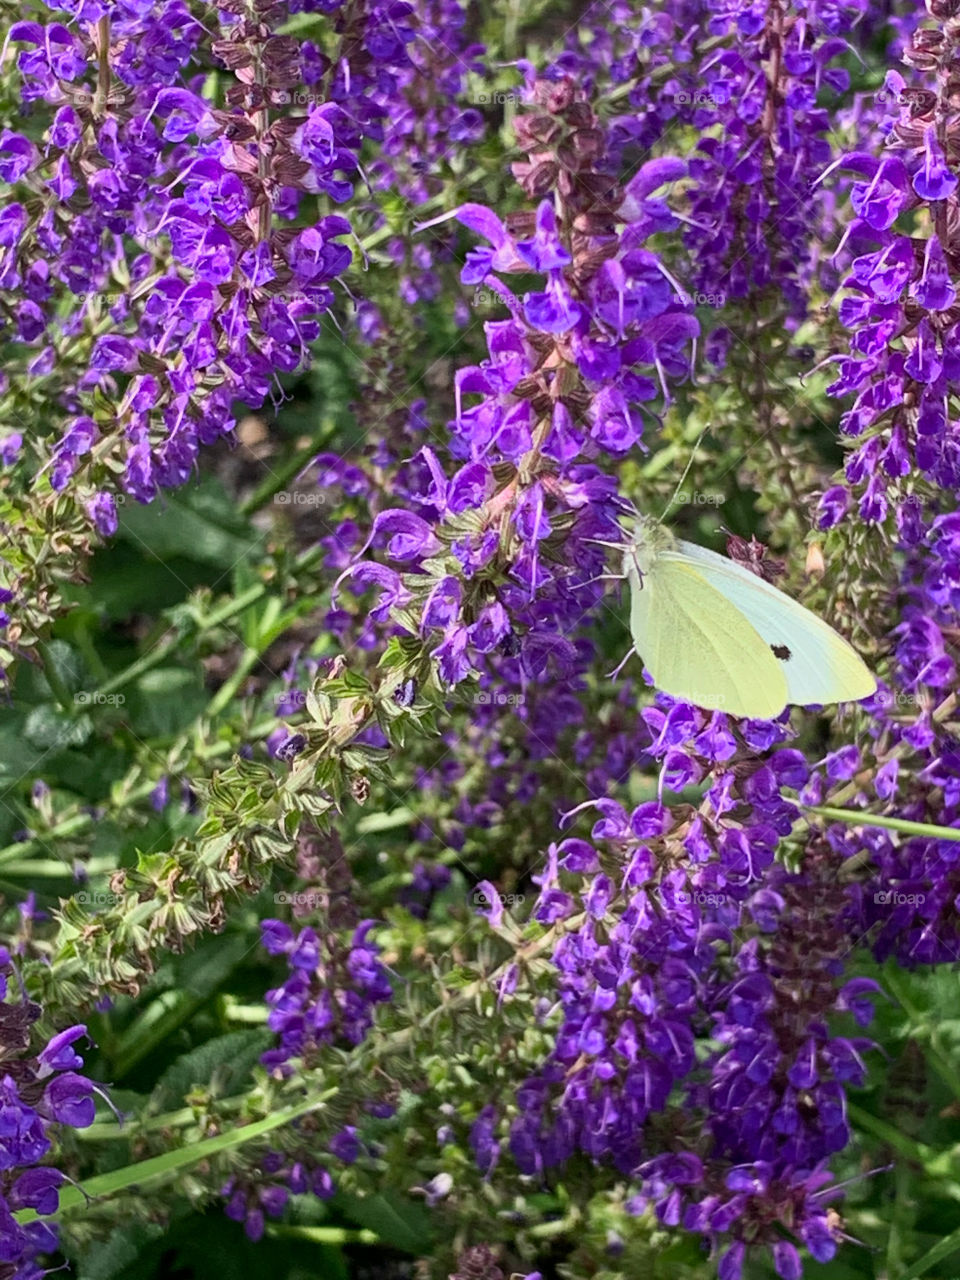 Male cabbage white butterfly on purple flowers. 